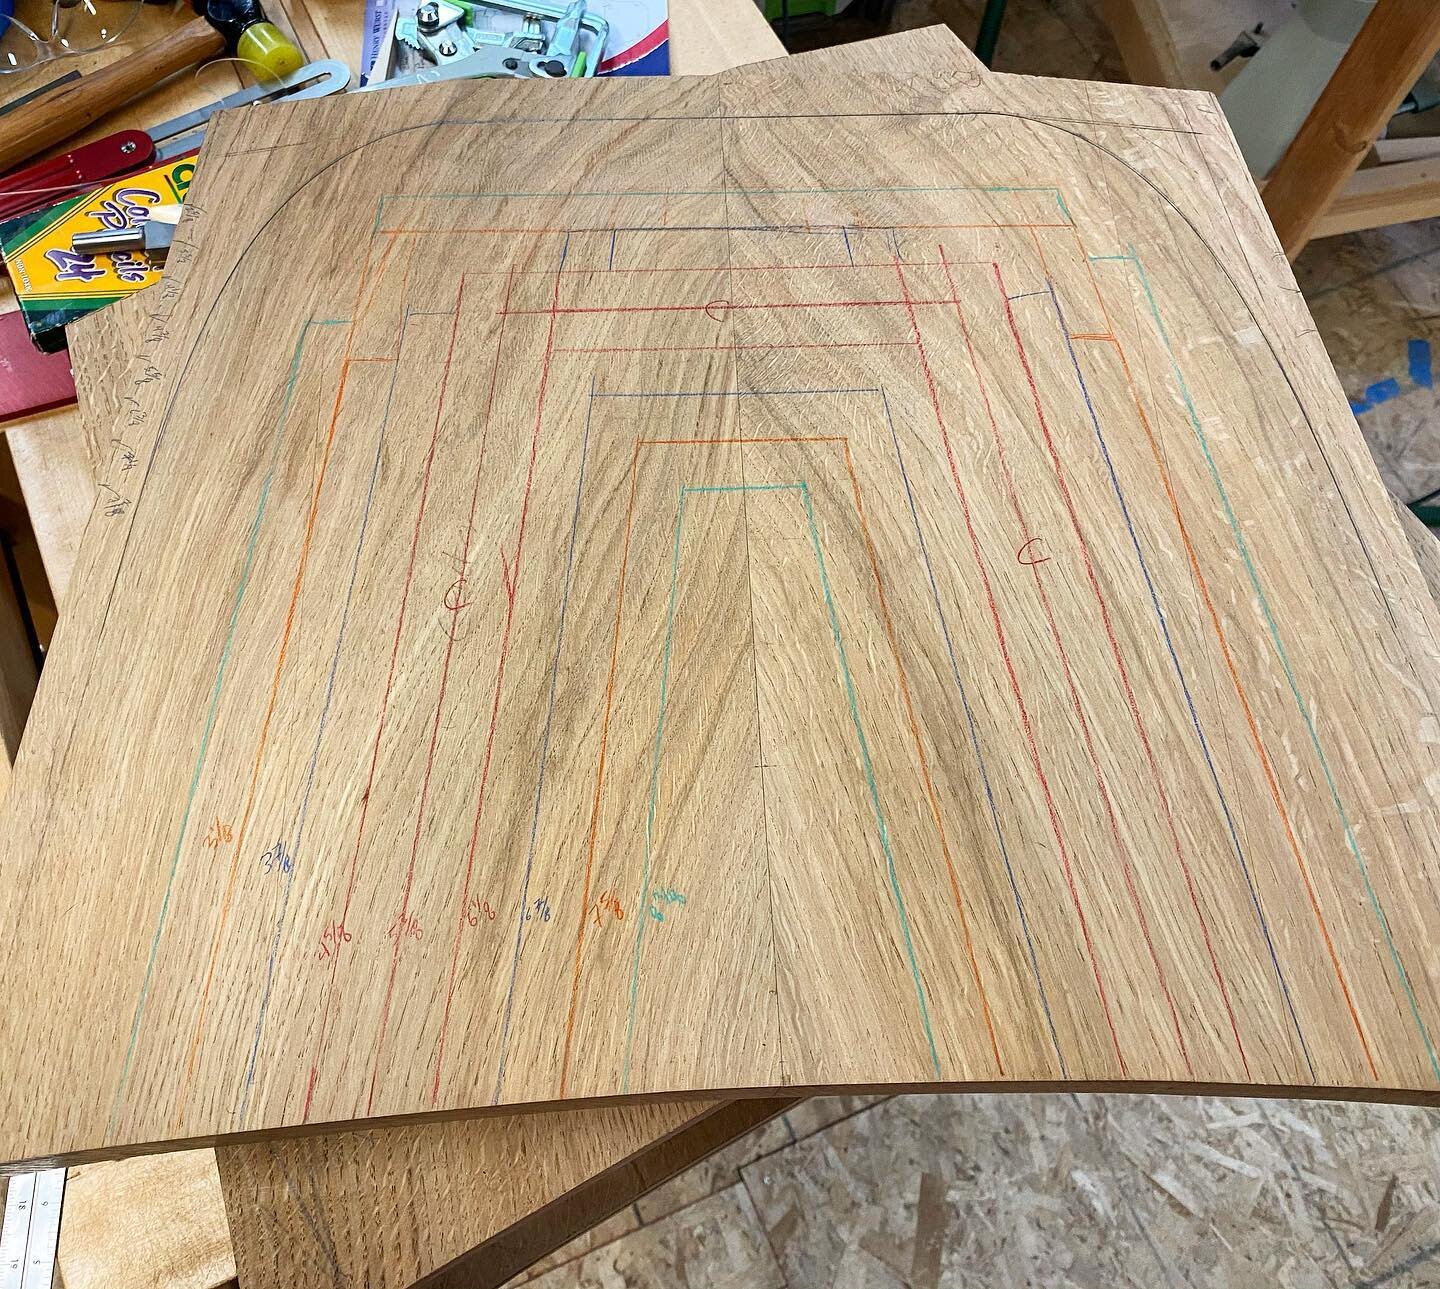 Method to my madness. After carving a couple of seats via different manners in the past, I&rsquo;m turning to my router to hog out as much of the waste as I can. Each line indicates the center of the bit I&rsquo;m using and the colors indicate the de